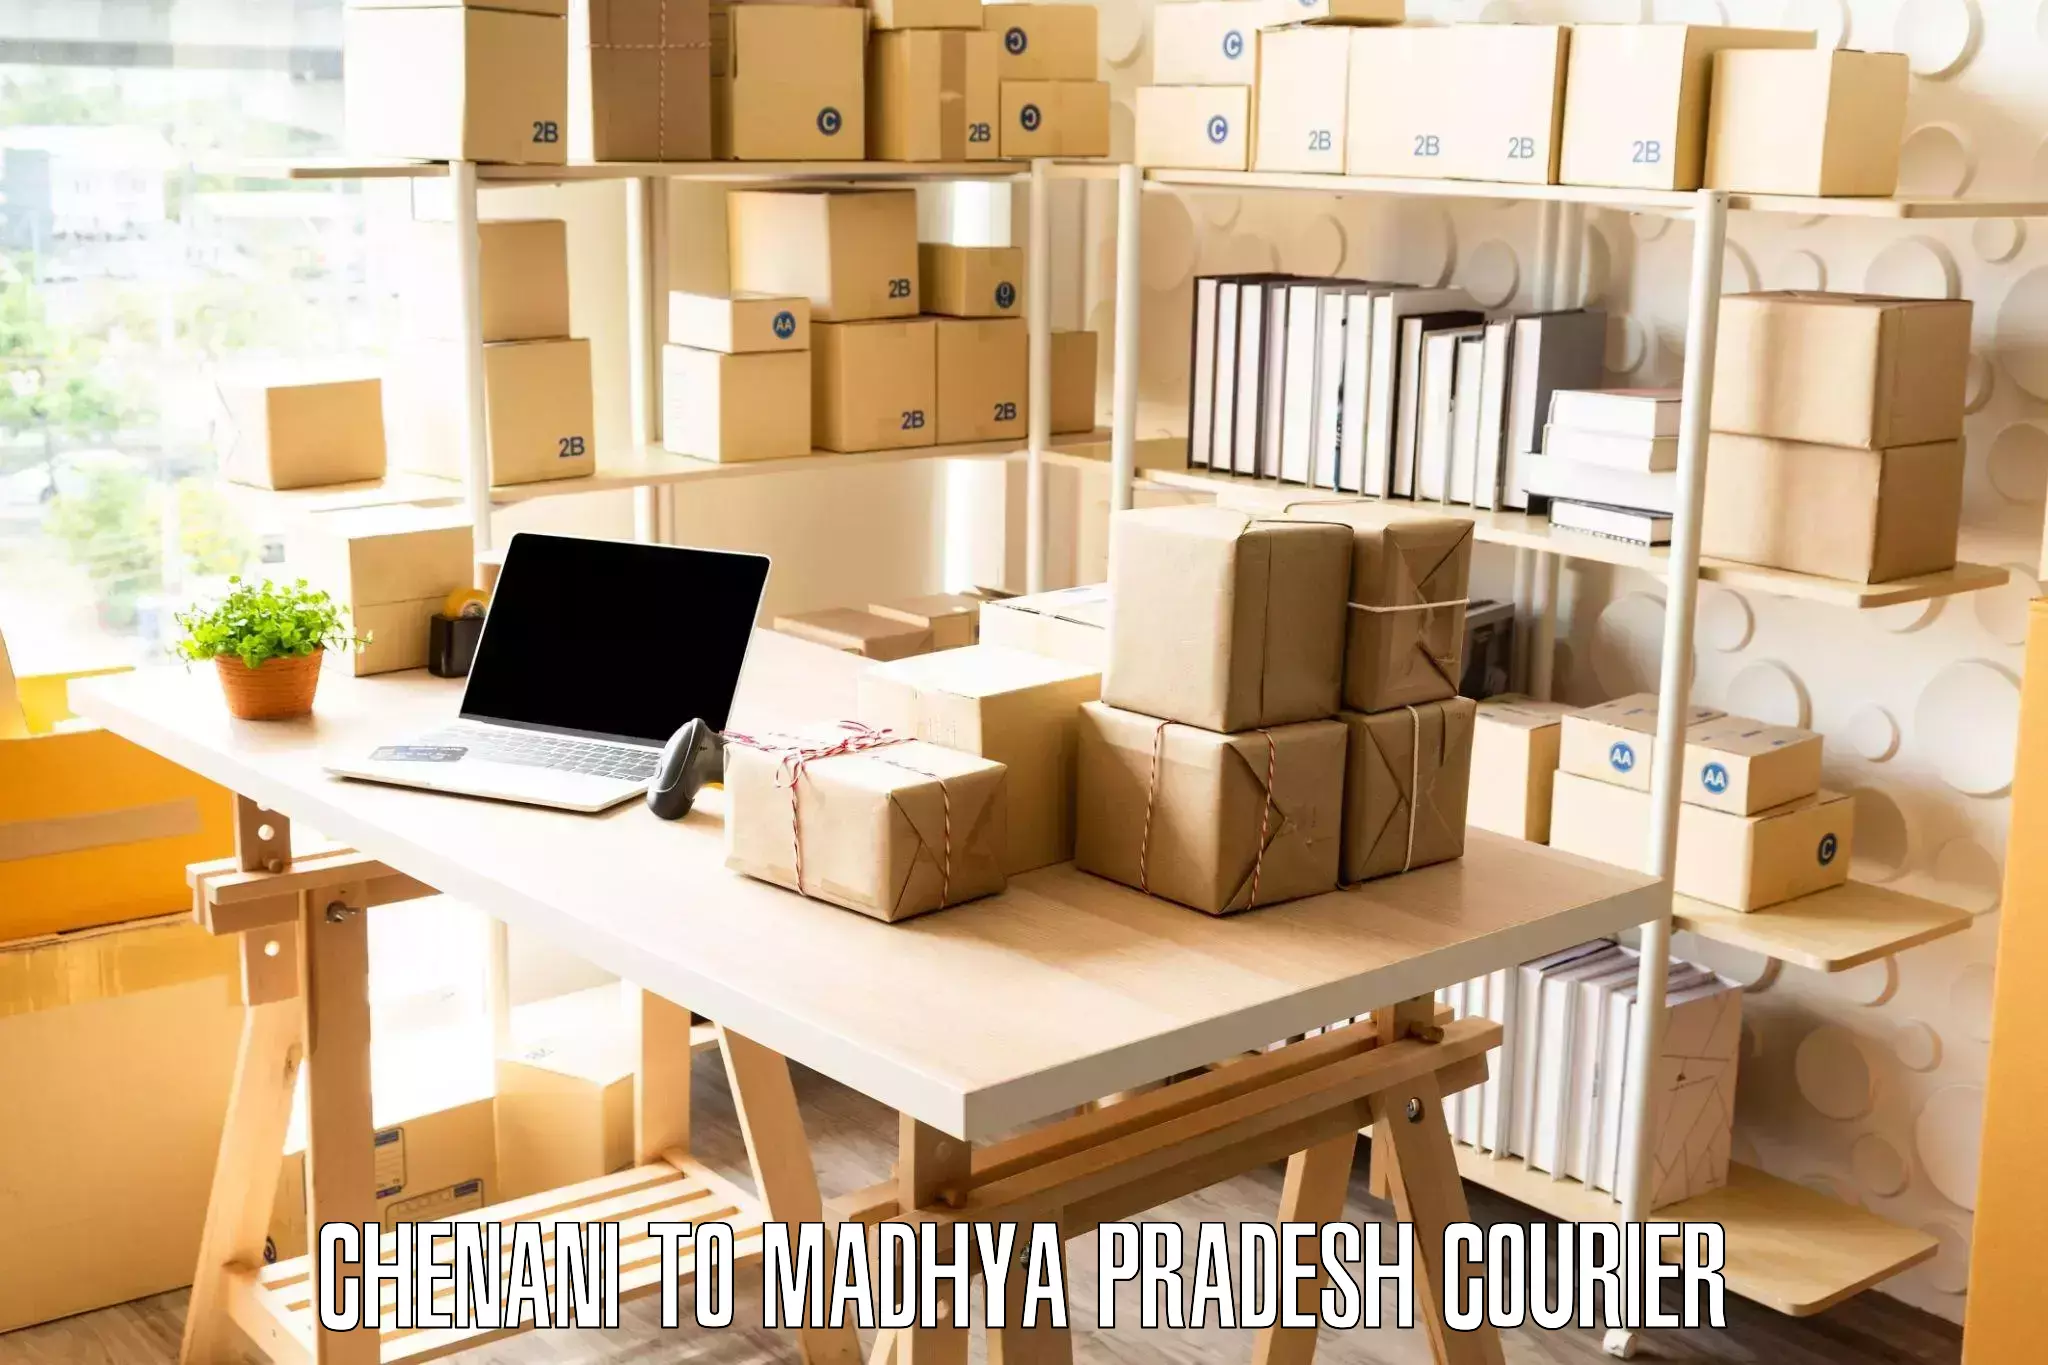 Home shifting services Chenani to Datia